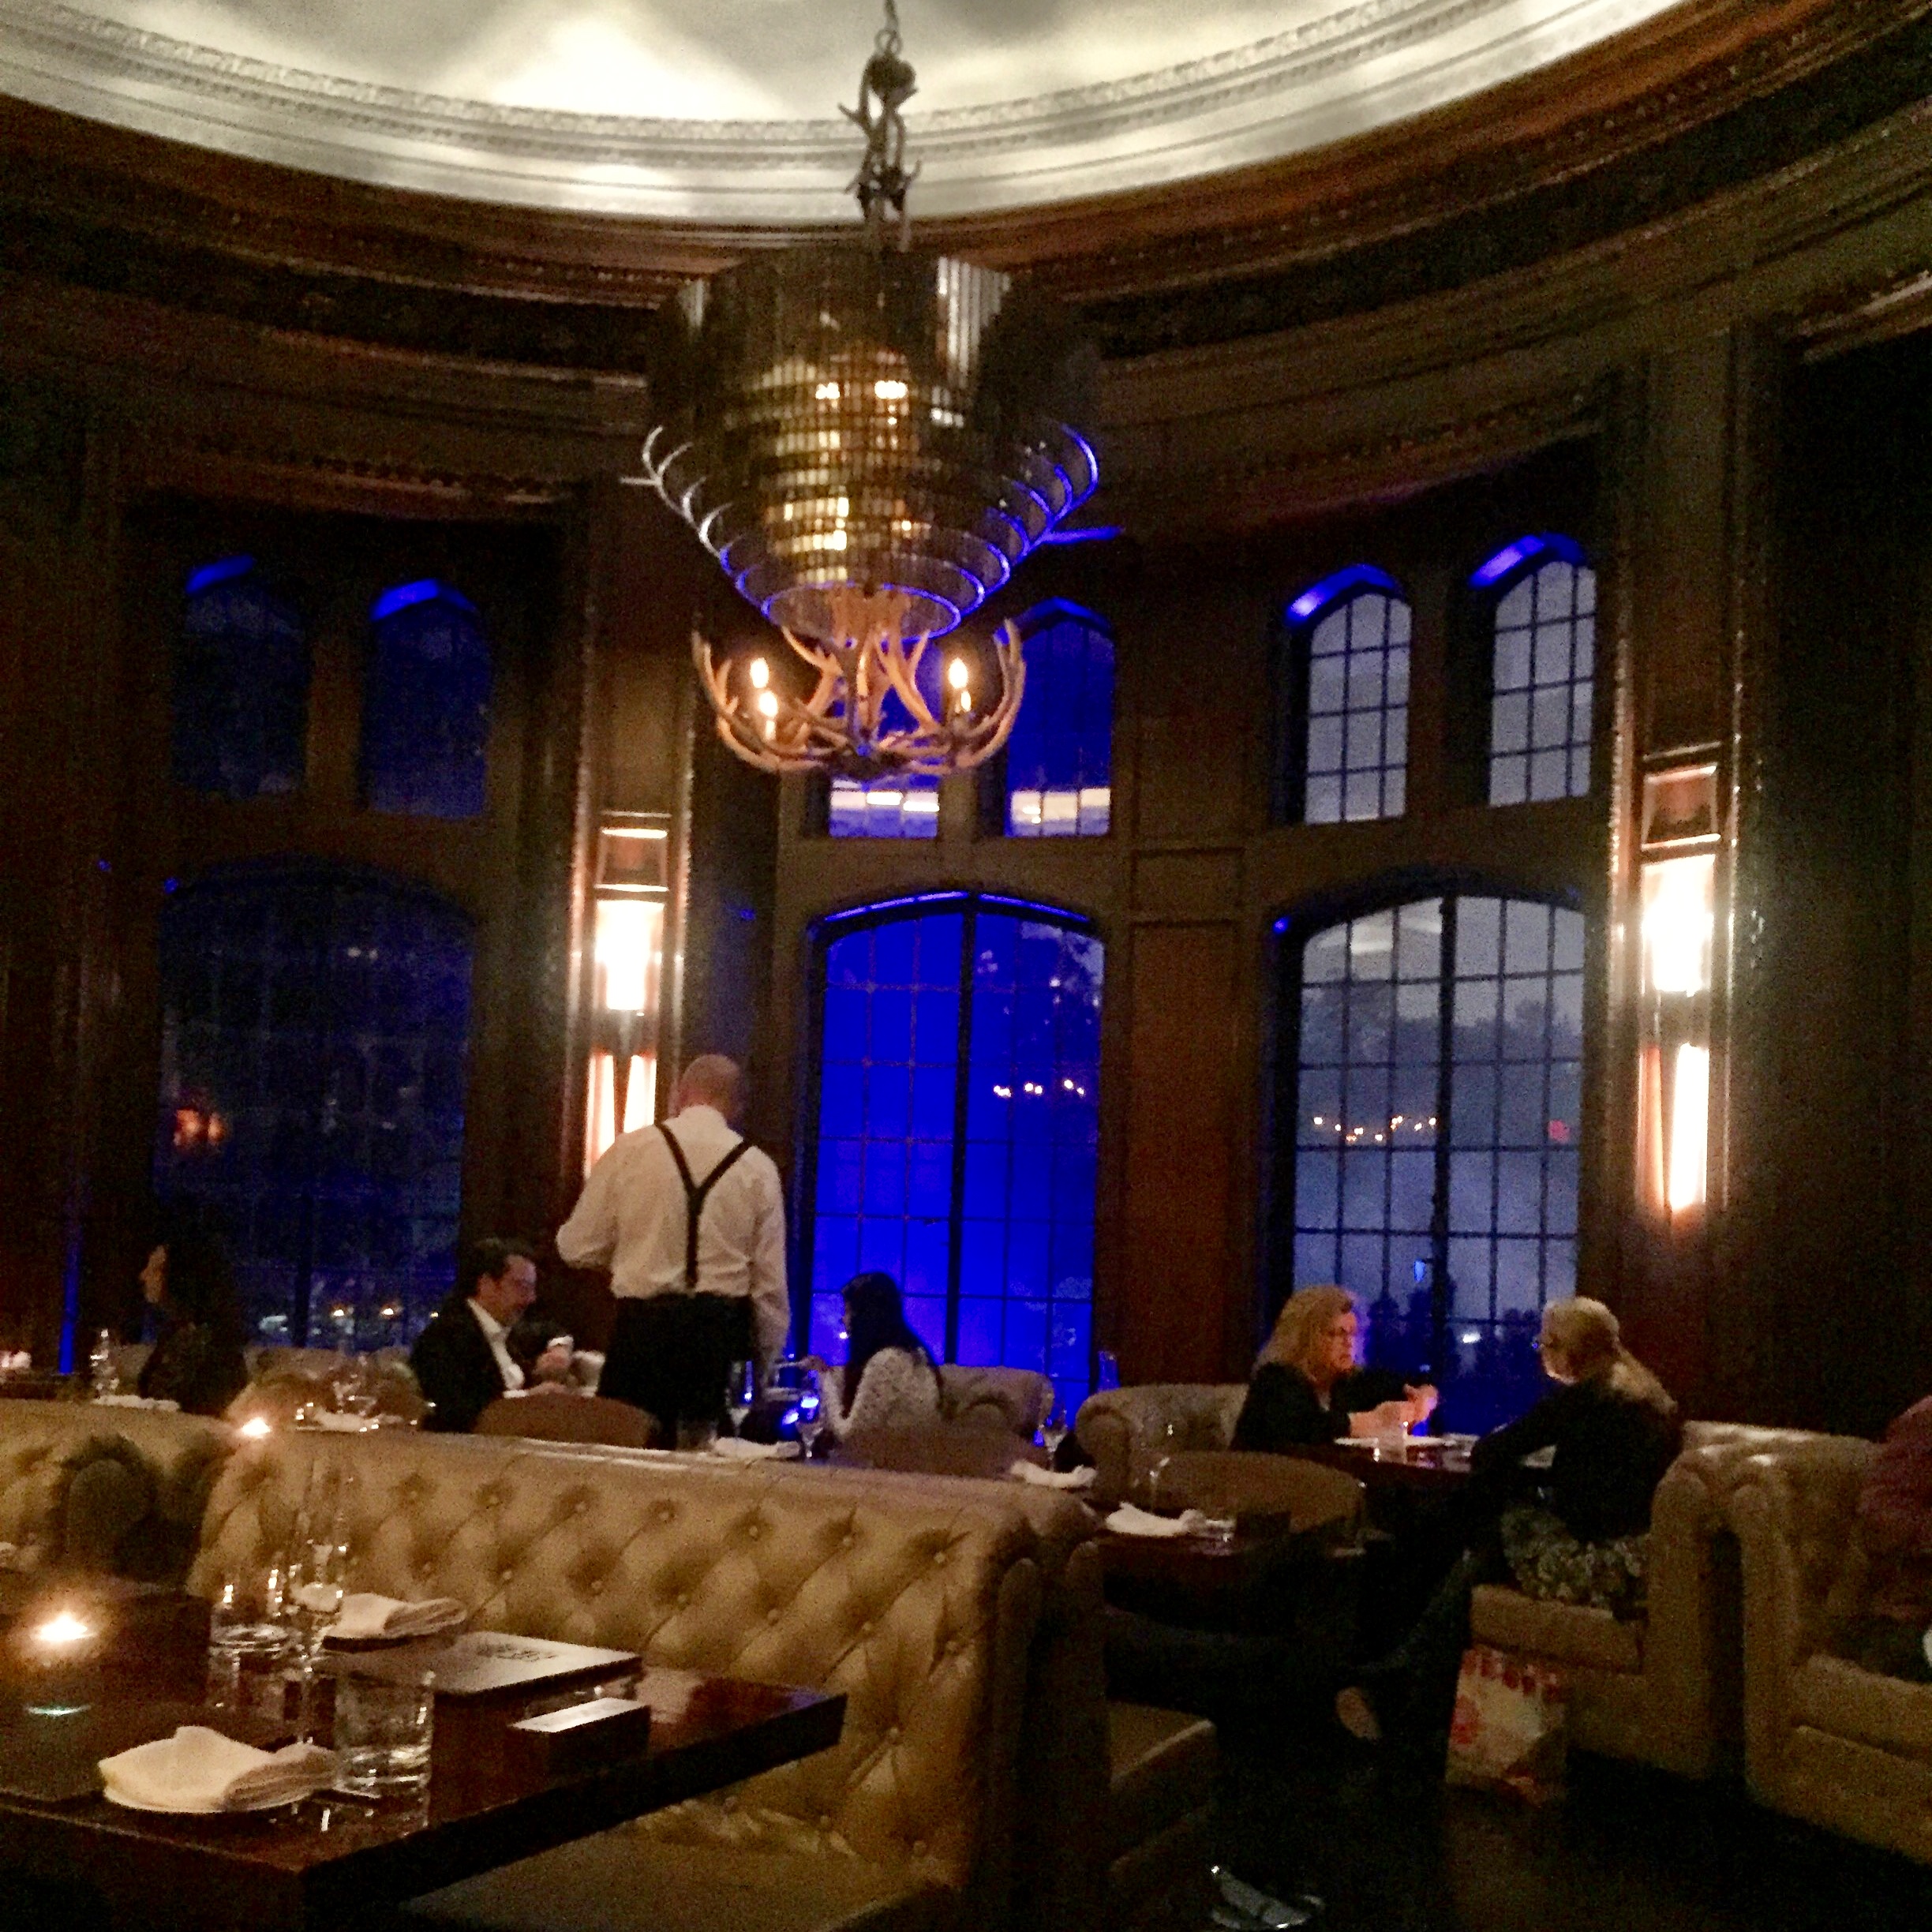 BlueBlood Steakhouse – Royally overpriced and not quite fit for a queen